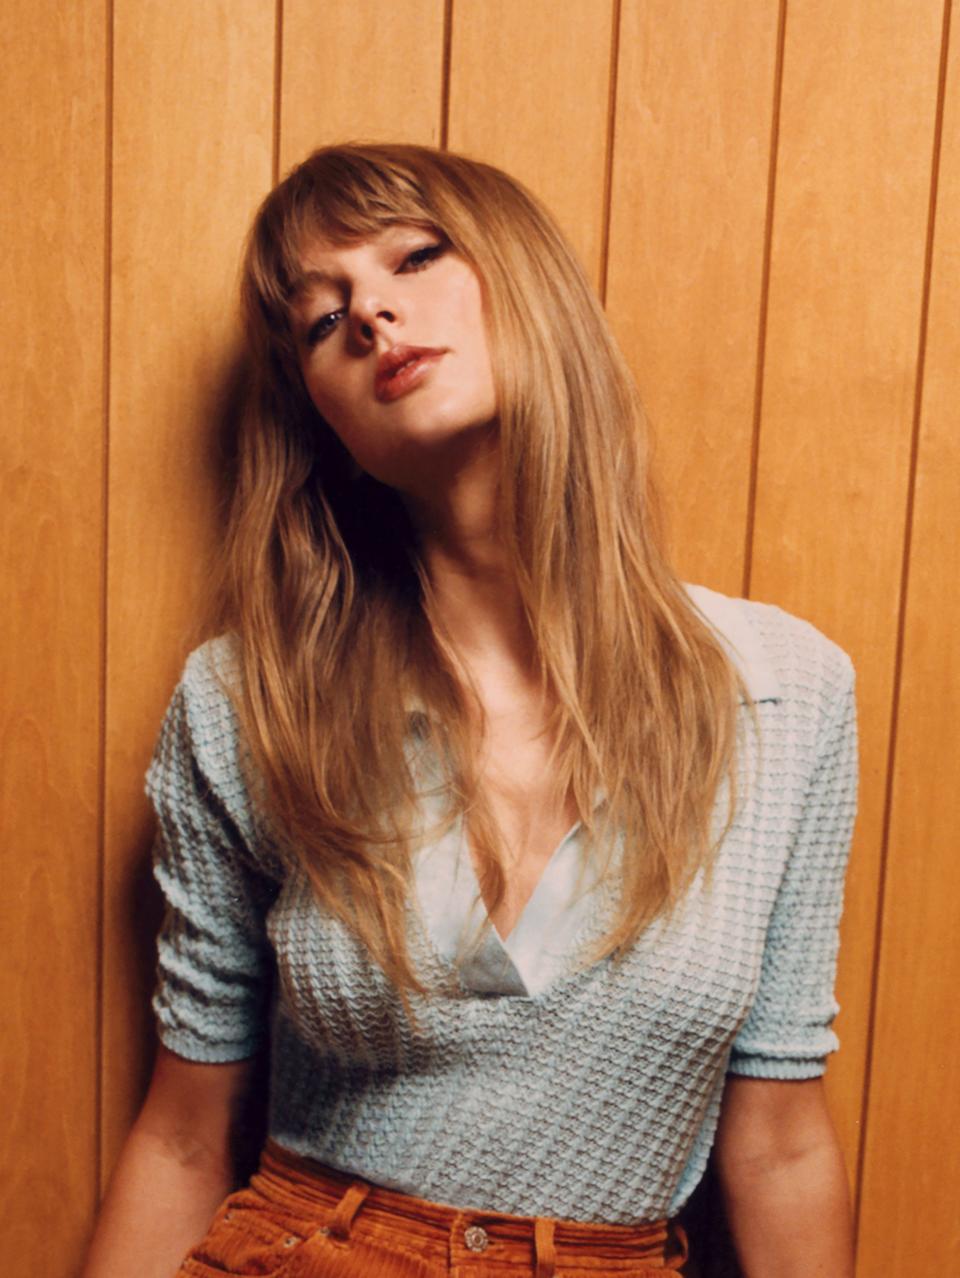 Taylor Swift's "Midnights" album set numerous chart records its first week of release.